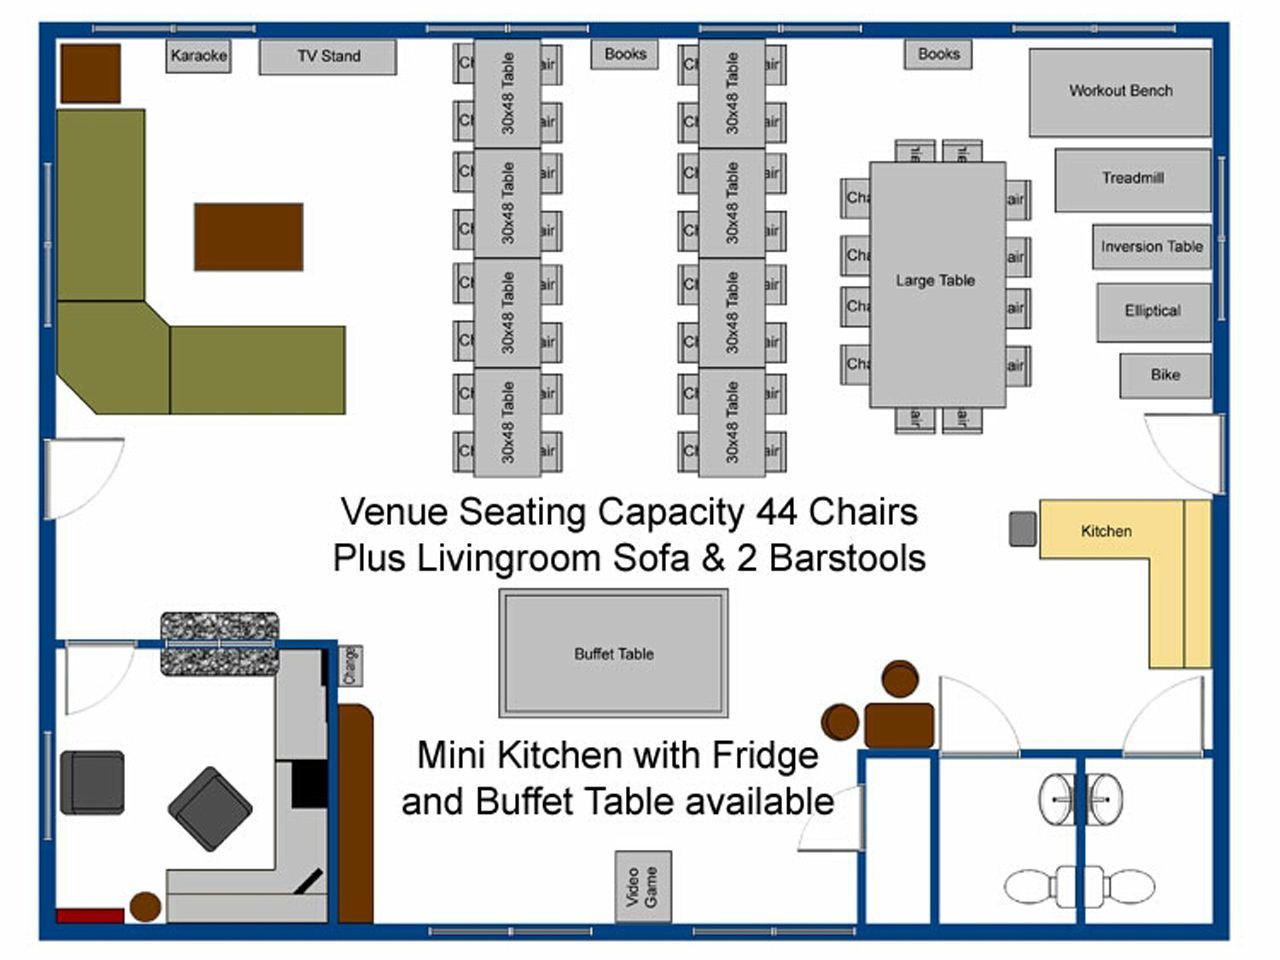 a floor plan shows a venue seating capacity of 44 chairs